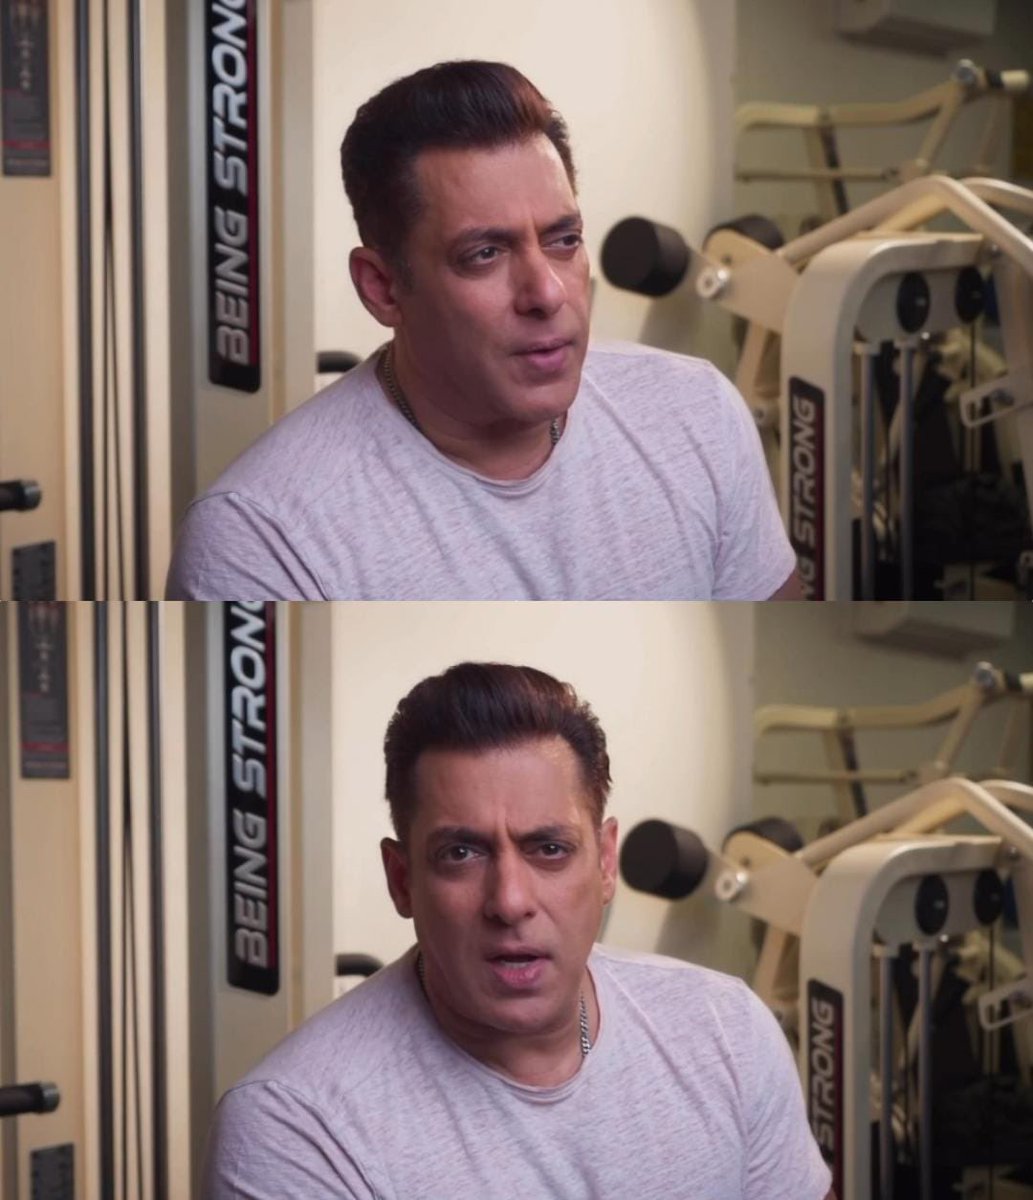 #SalmanKhan -the fearless beast 🔥 When u know millions pray for u every day, u fear nothing!